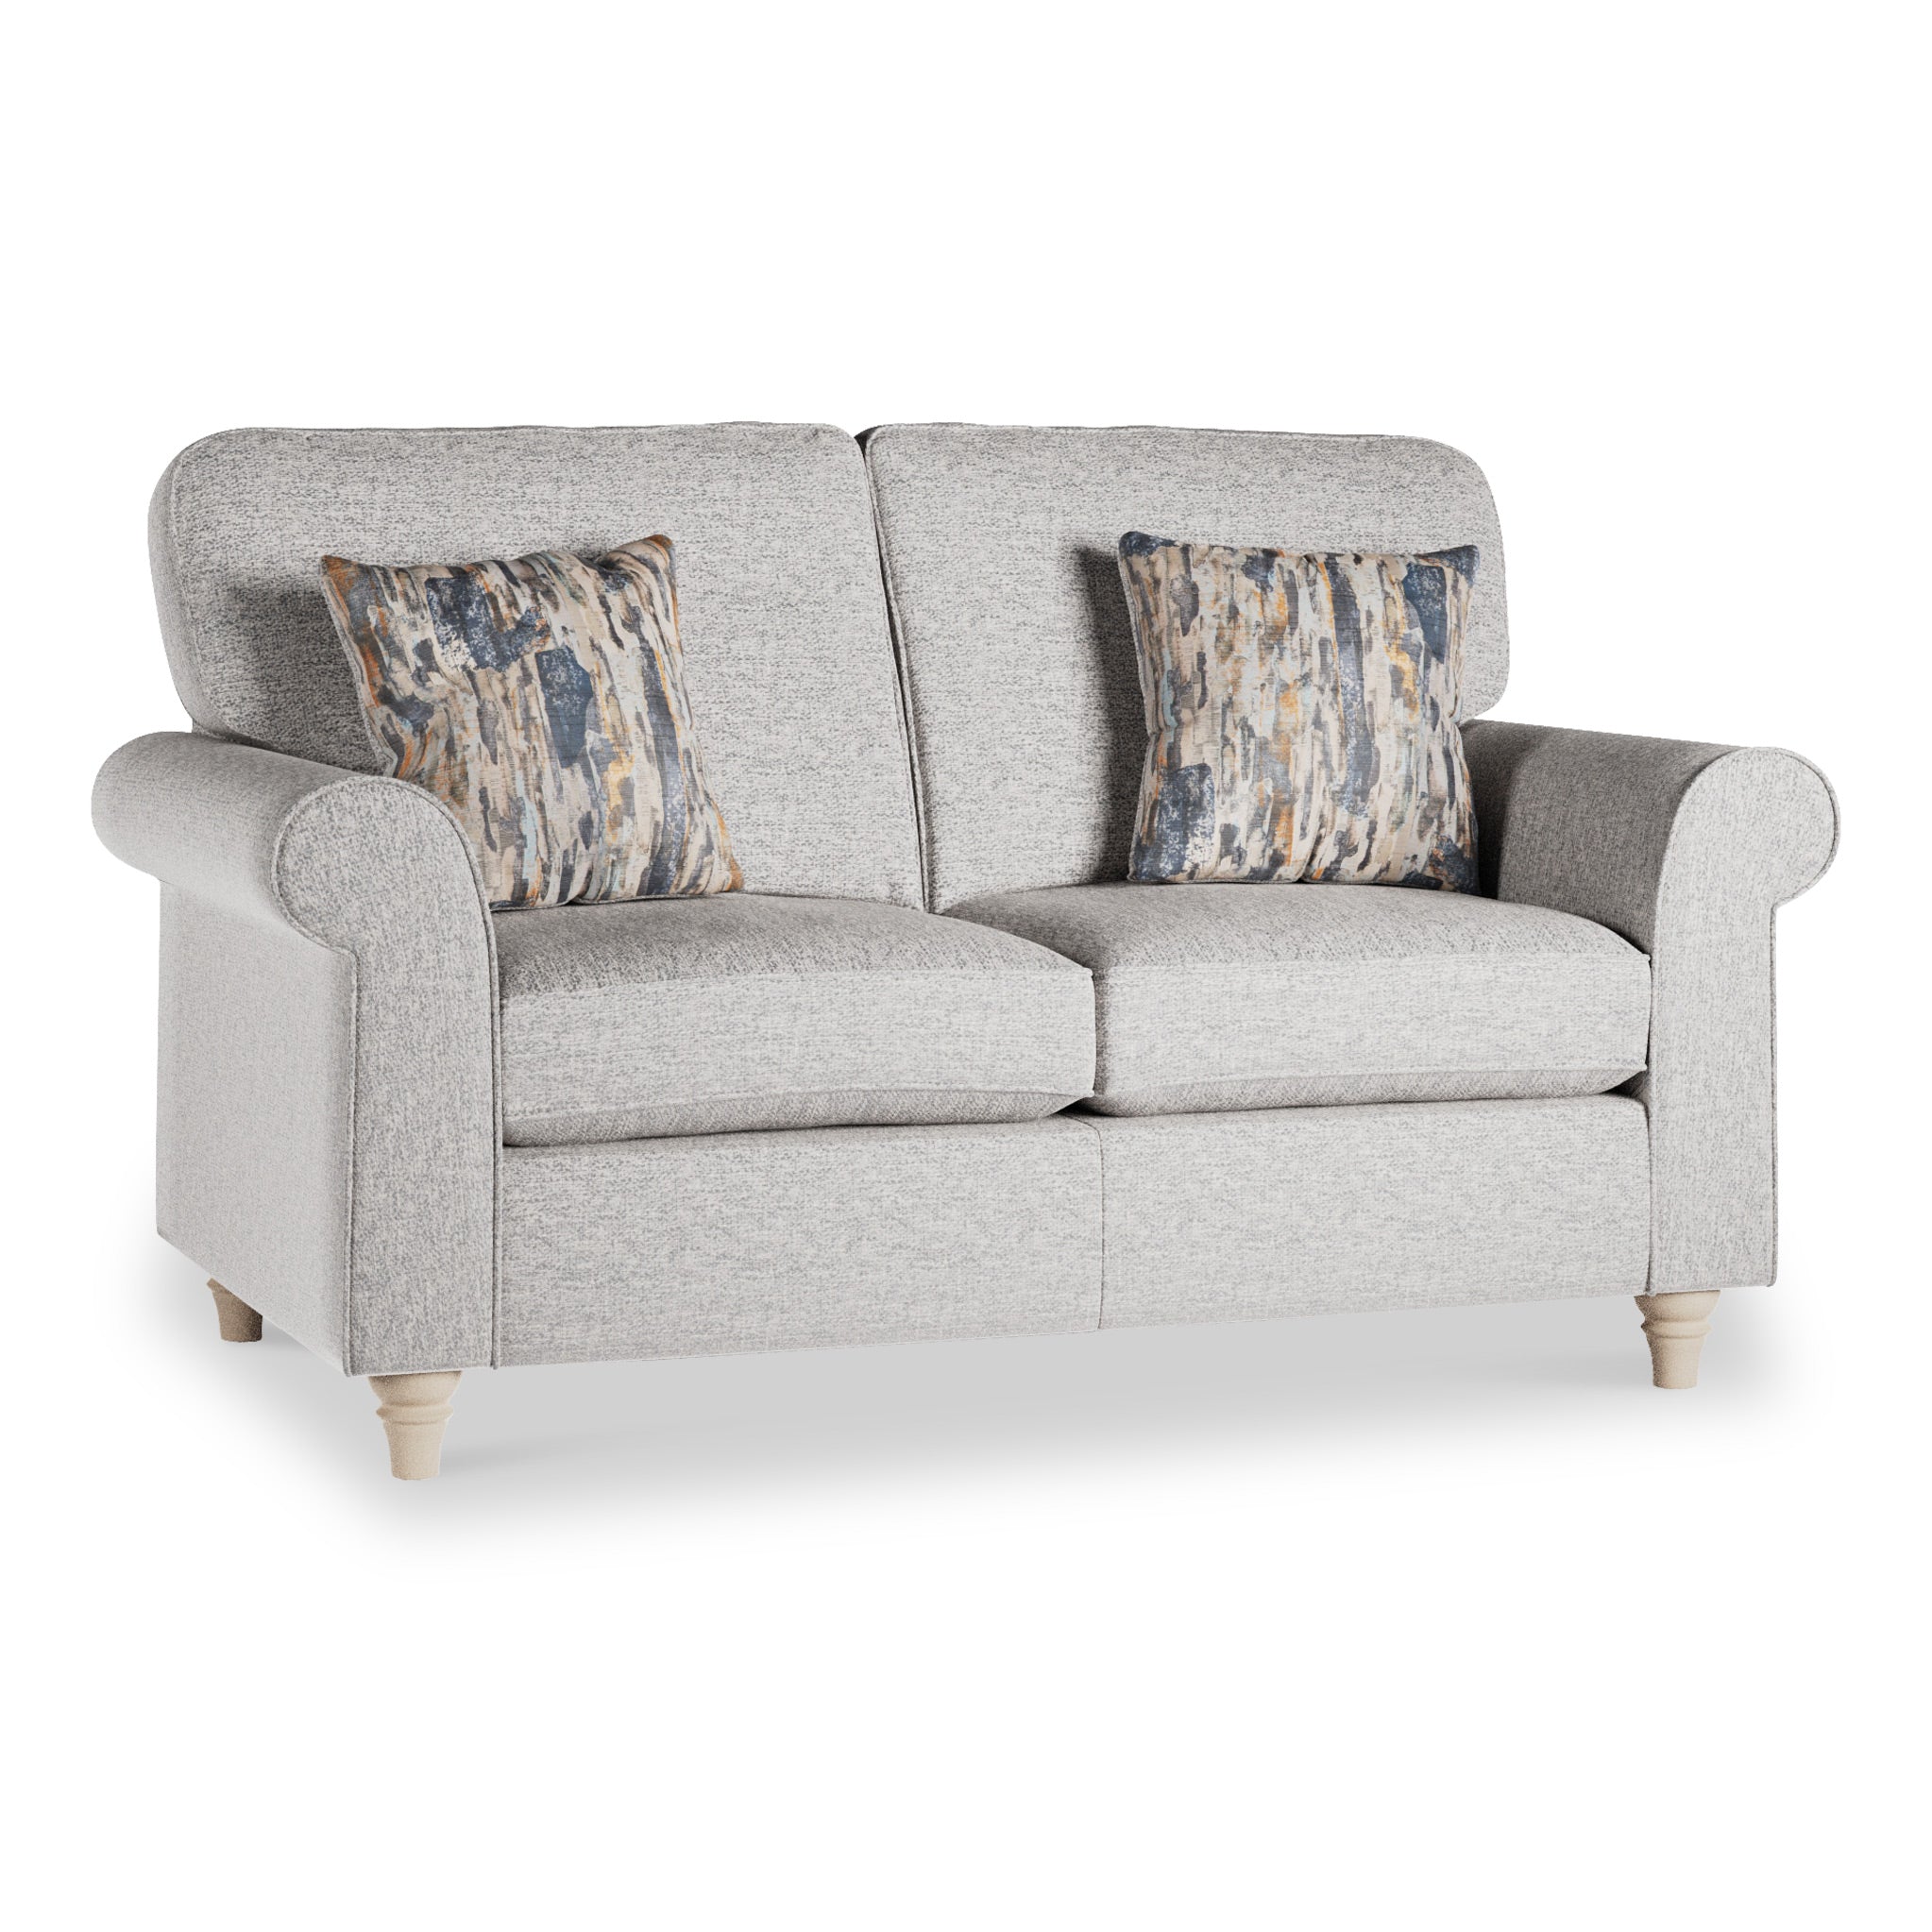 Jude 2 Seater Sofa Comfortable And Stylish Couch Roseland